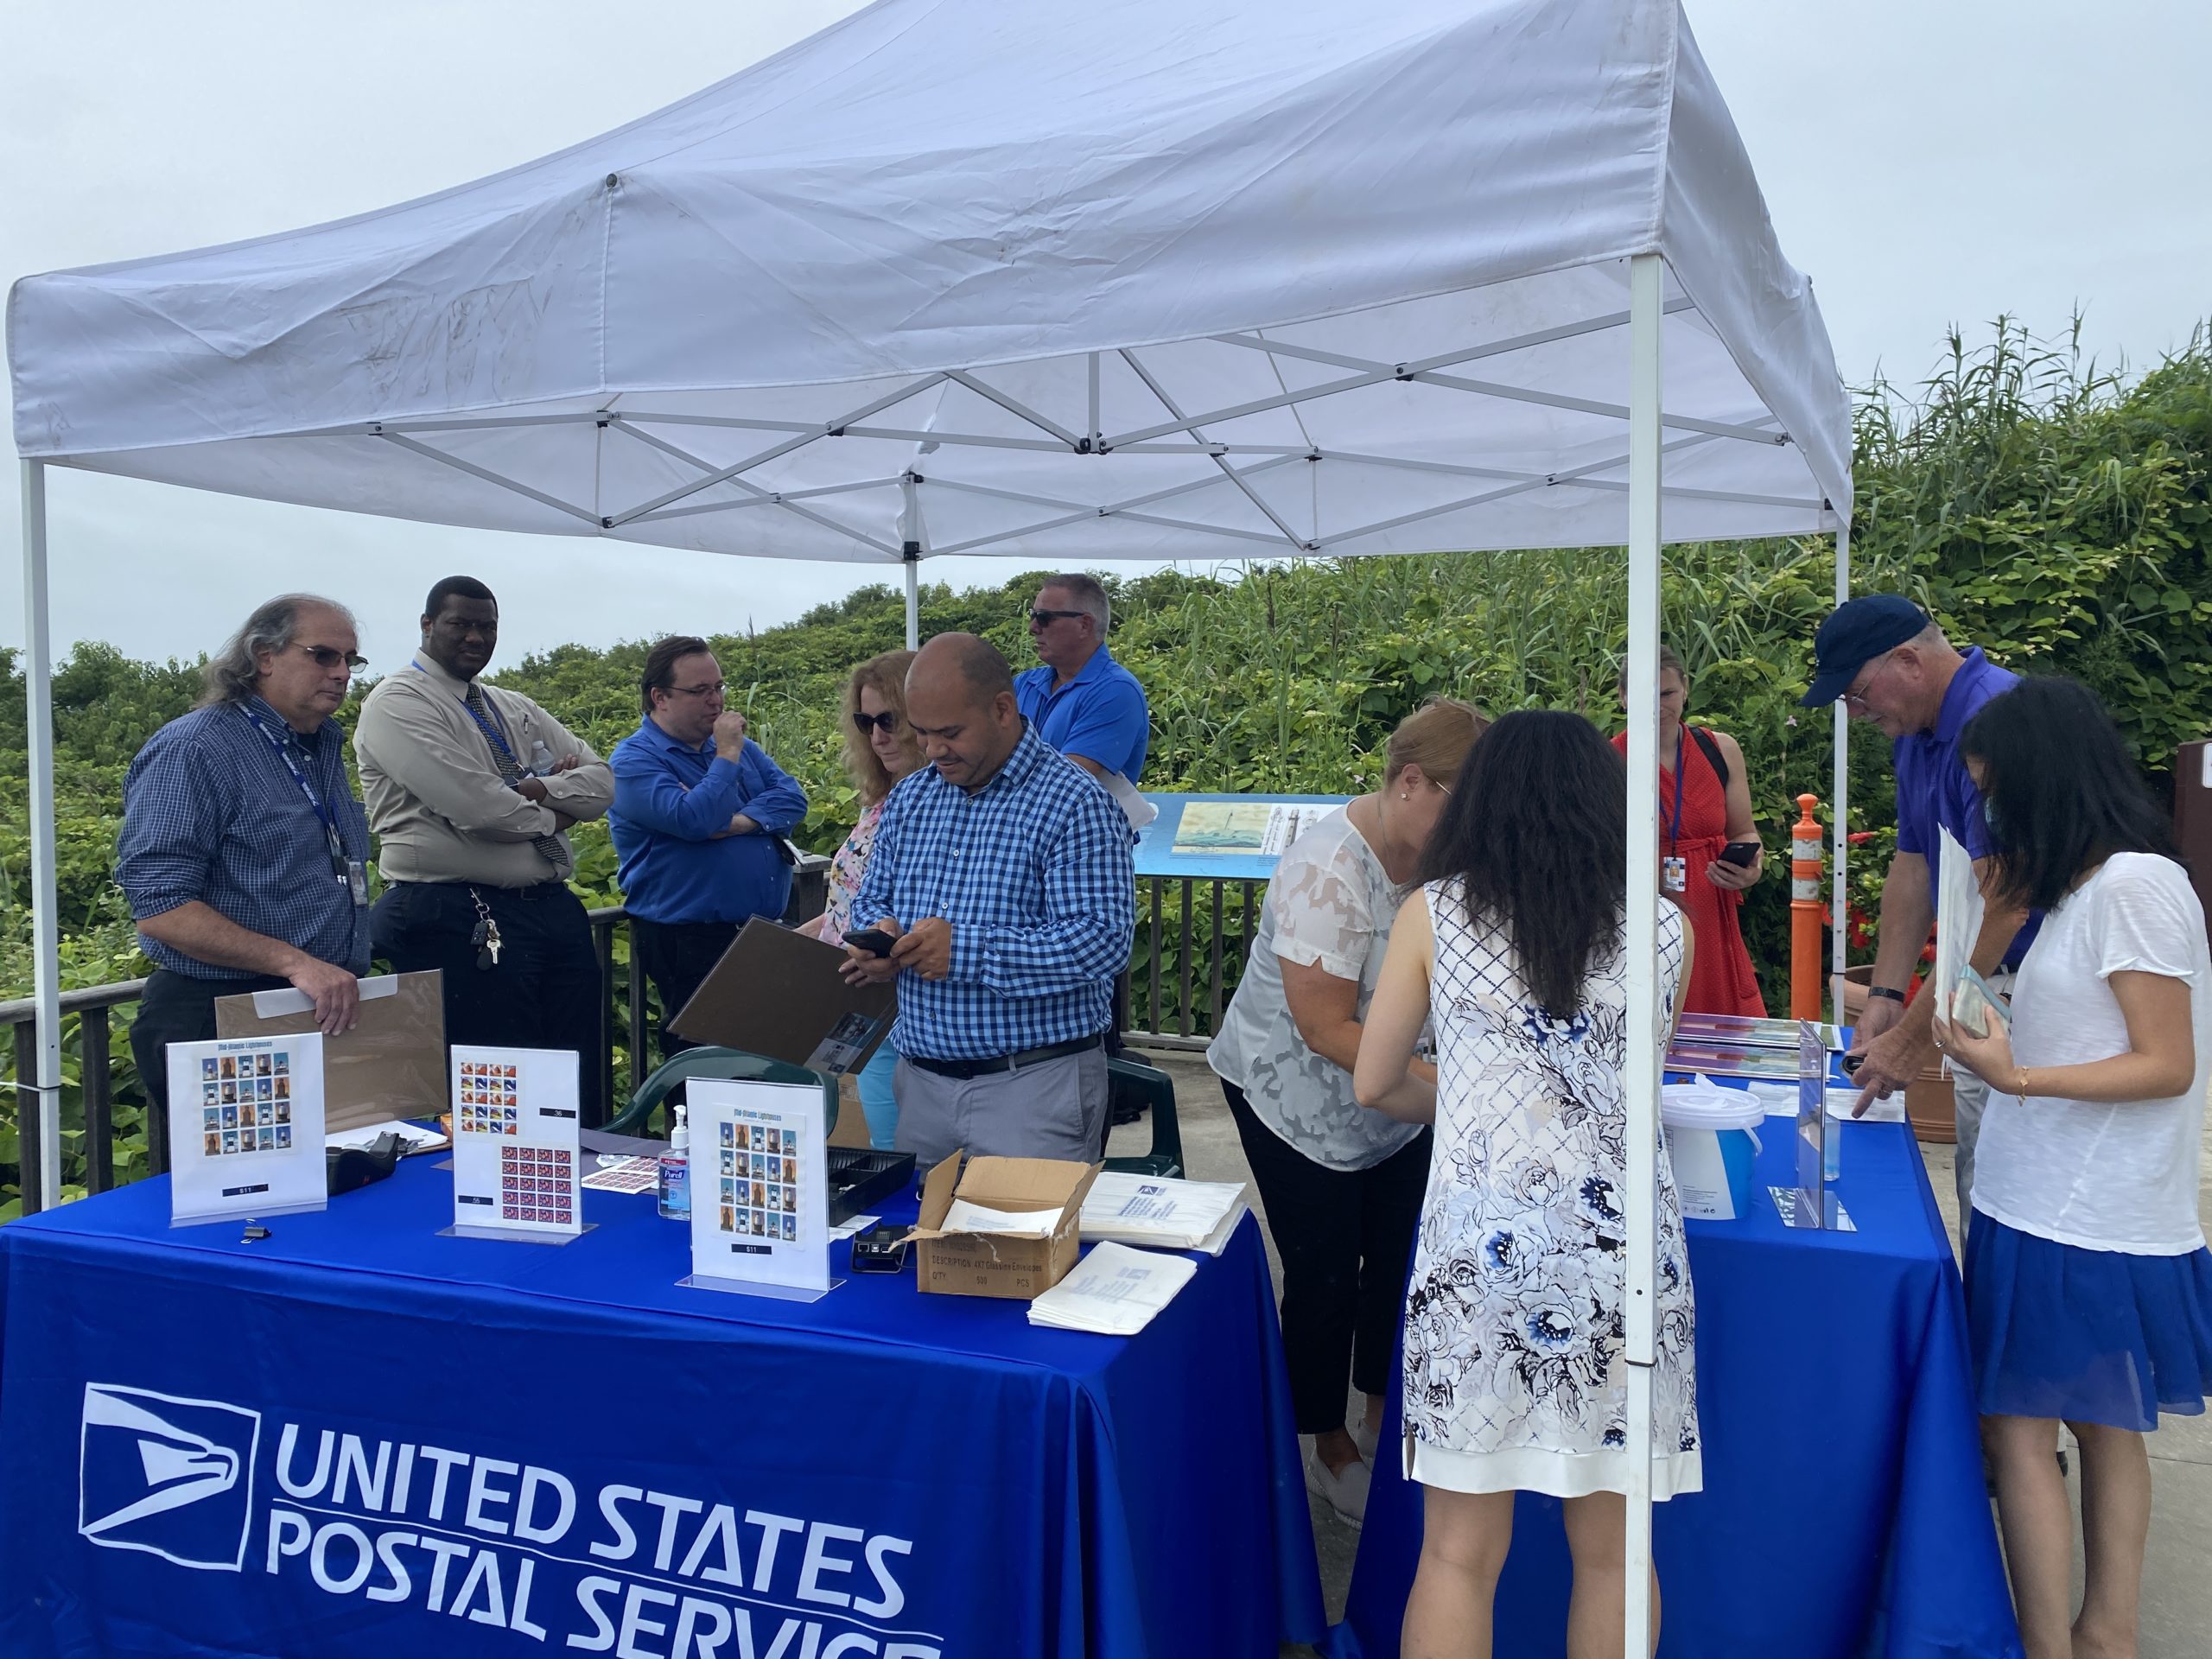 The United States Postal Service held an event in August at the Montauk Lighthouse to celebrate the rollout of the stamps. COURTESY MIA CERTIC